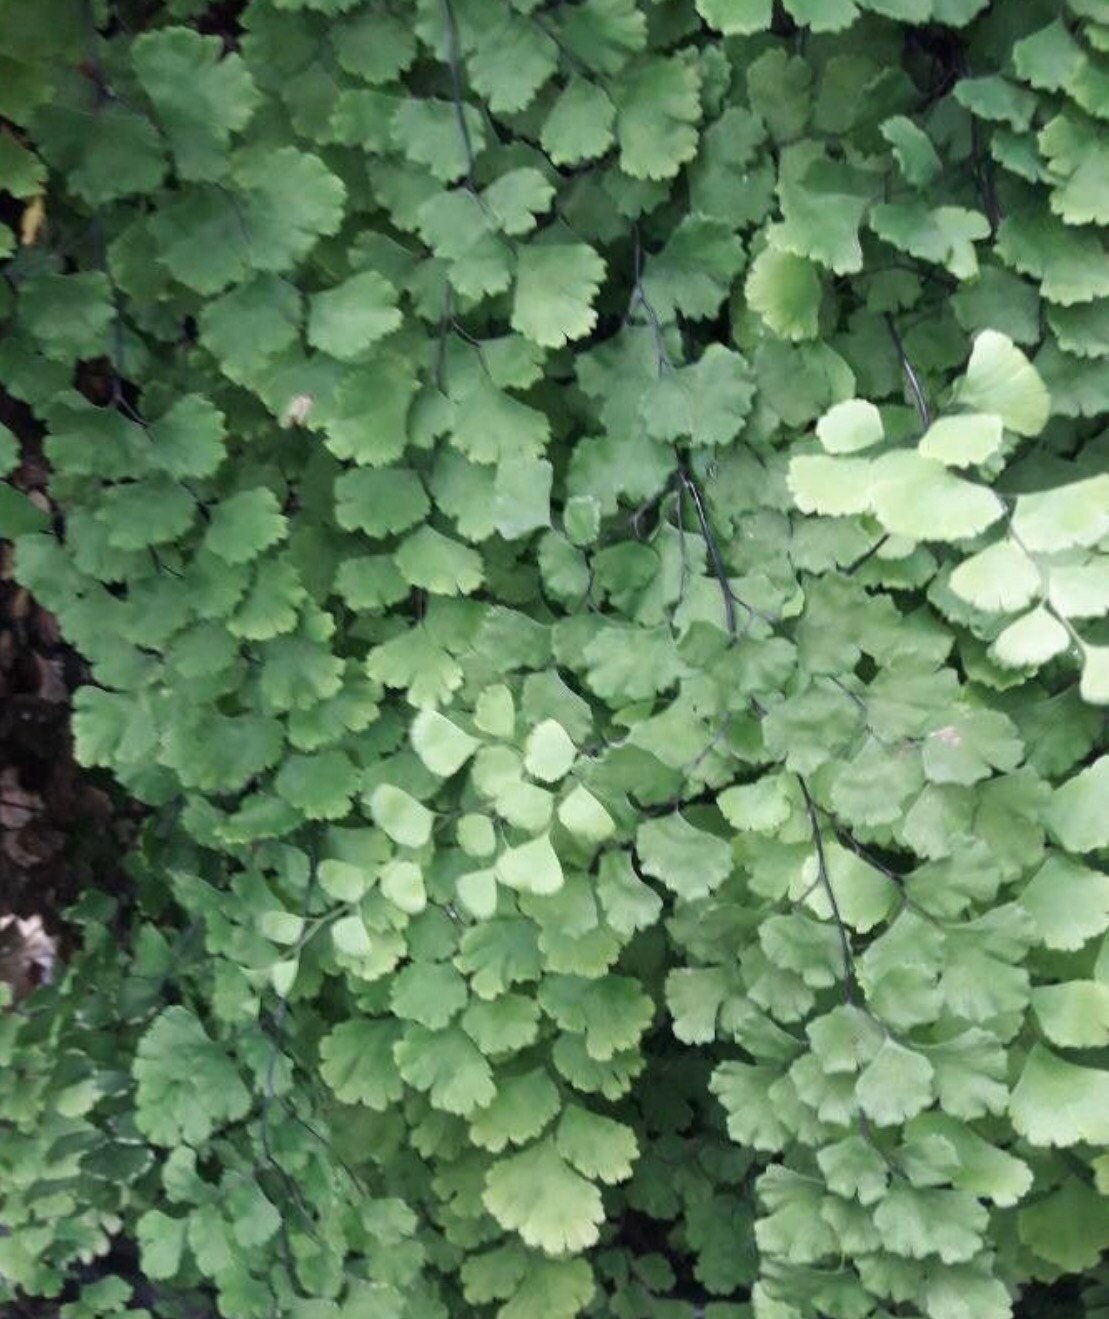 Adiantum capillus-veneris, the Southern maidenhair fern with Phytosanitary  certification and Passport, grown by moss supplier